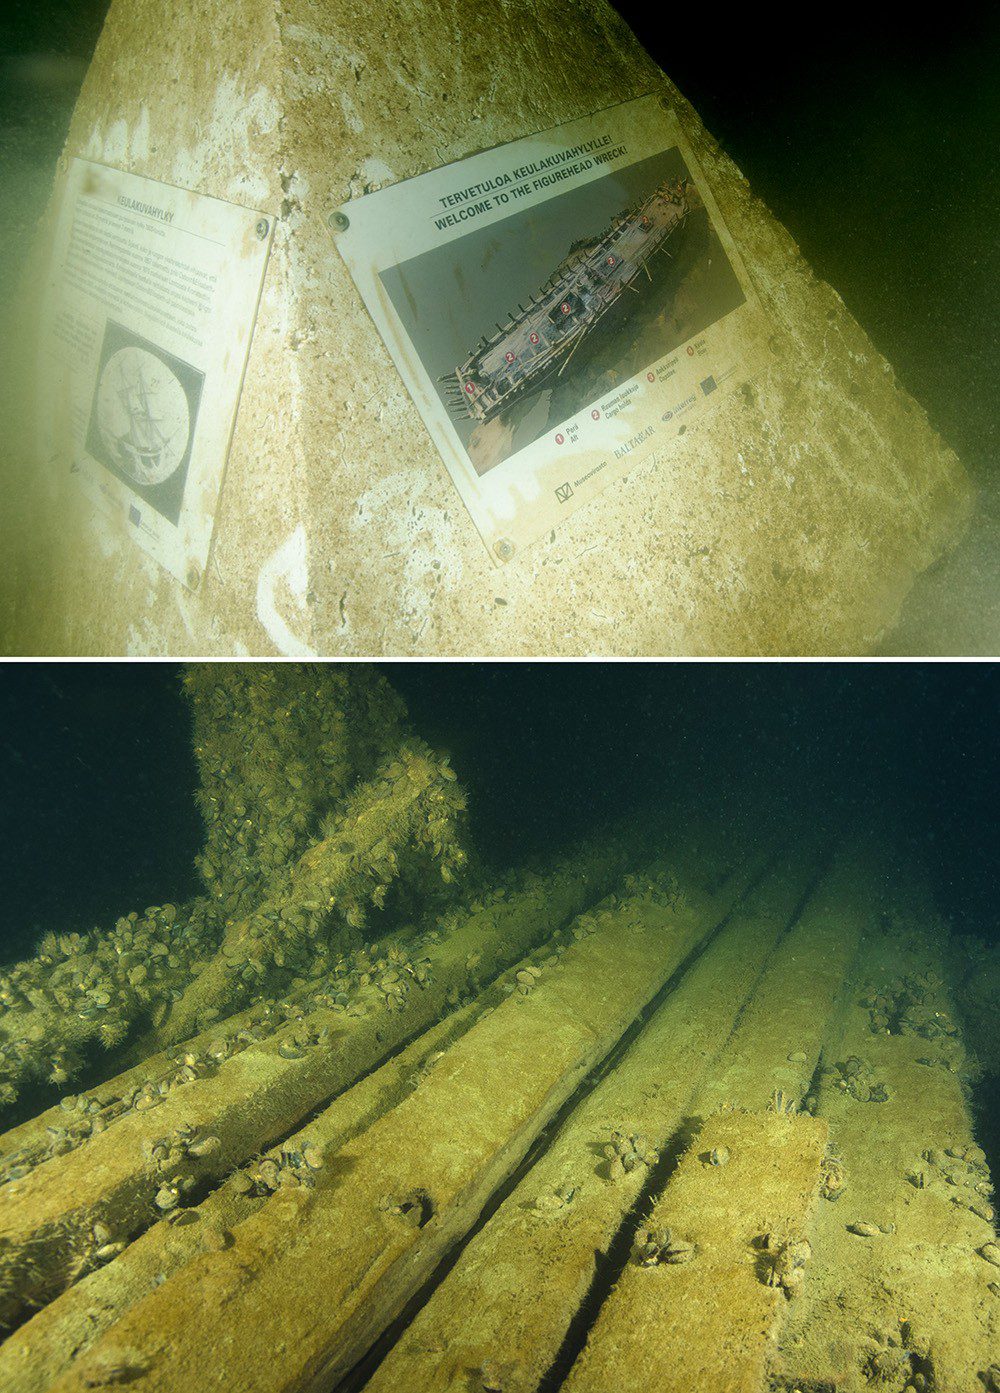 Top: Wreck info block for the Figurehead wreck. Above: Well-preserved wooden decking on the wreck.